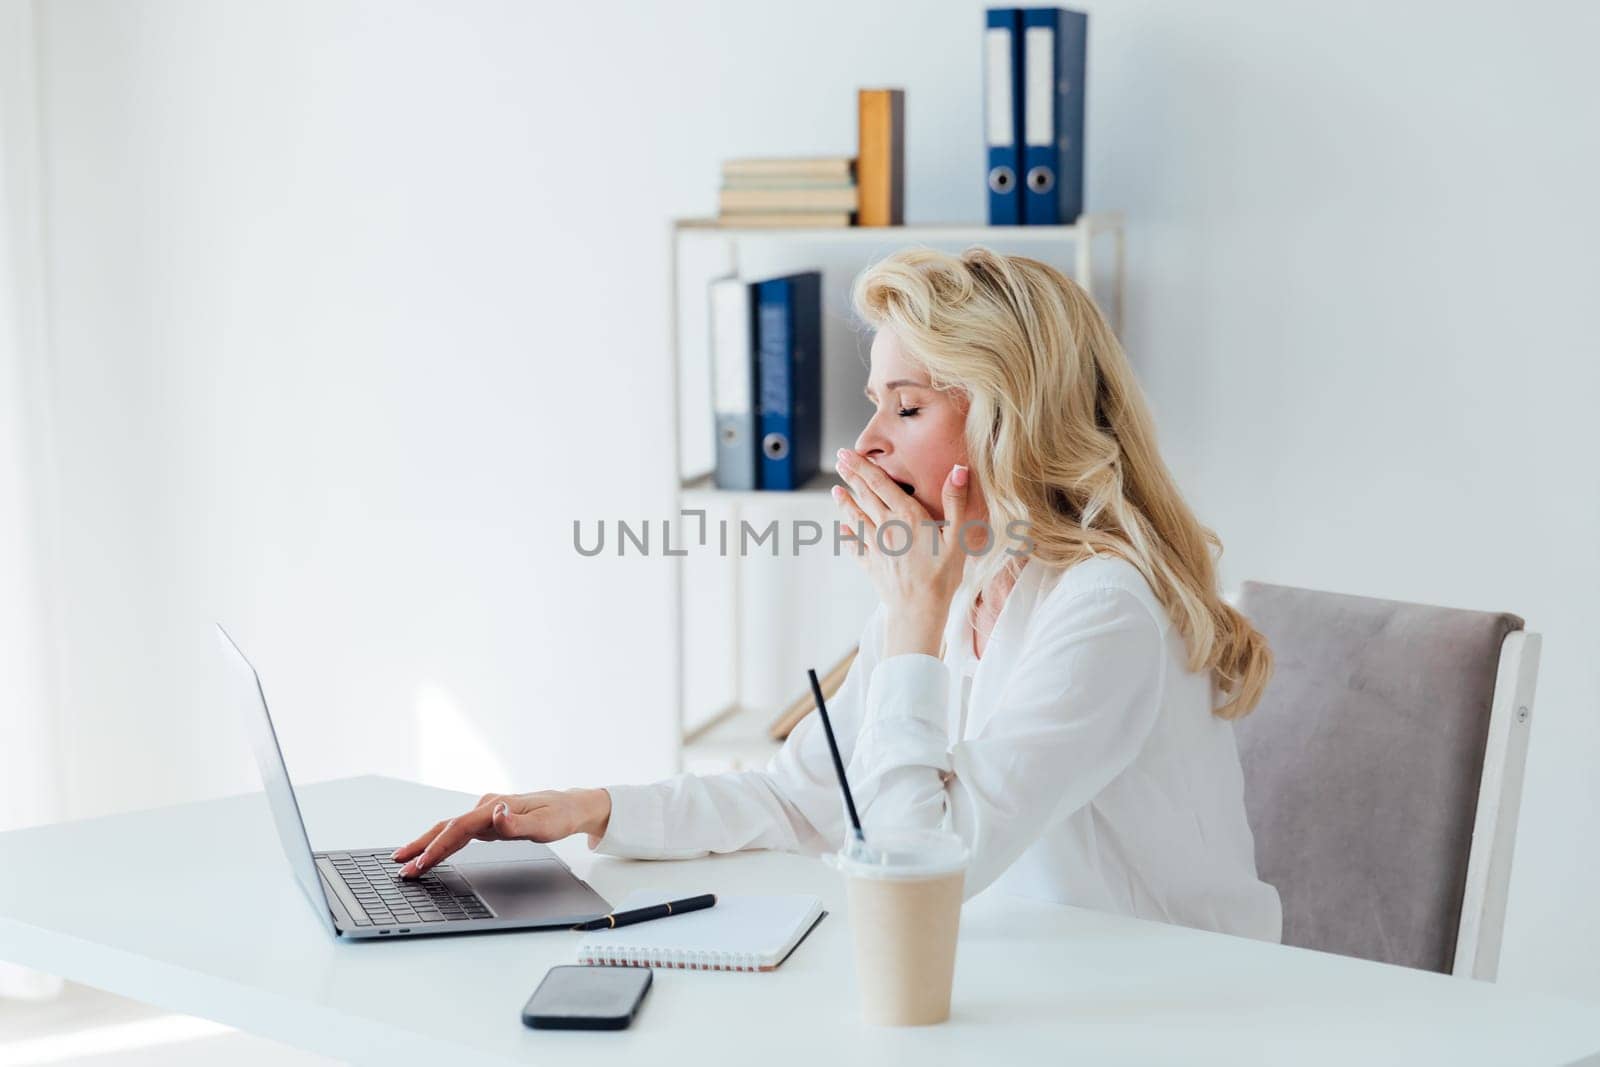 online communication a woman yawns at a laptop remote work a conversation on skype internet is boring